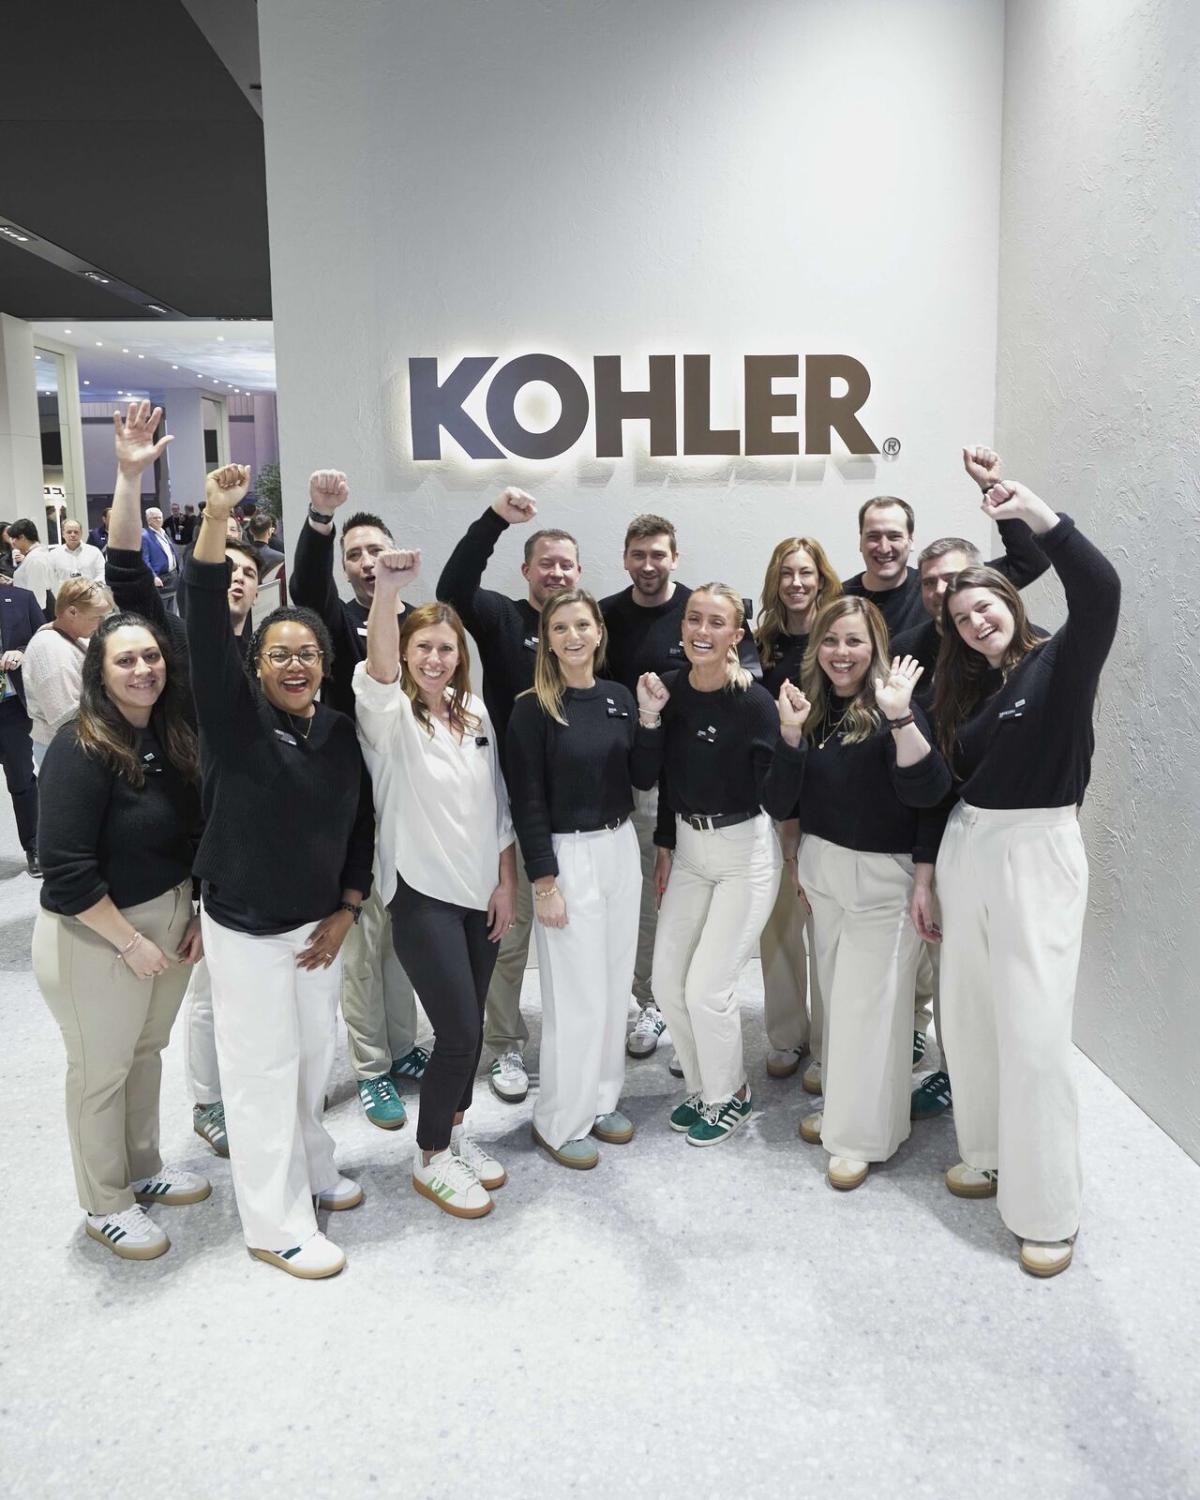 A team of people posed and cheering with arms up in front of a Kohler sign.